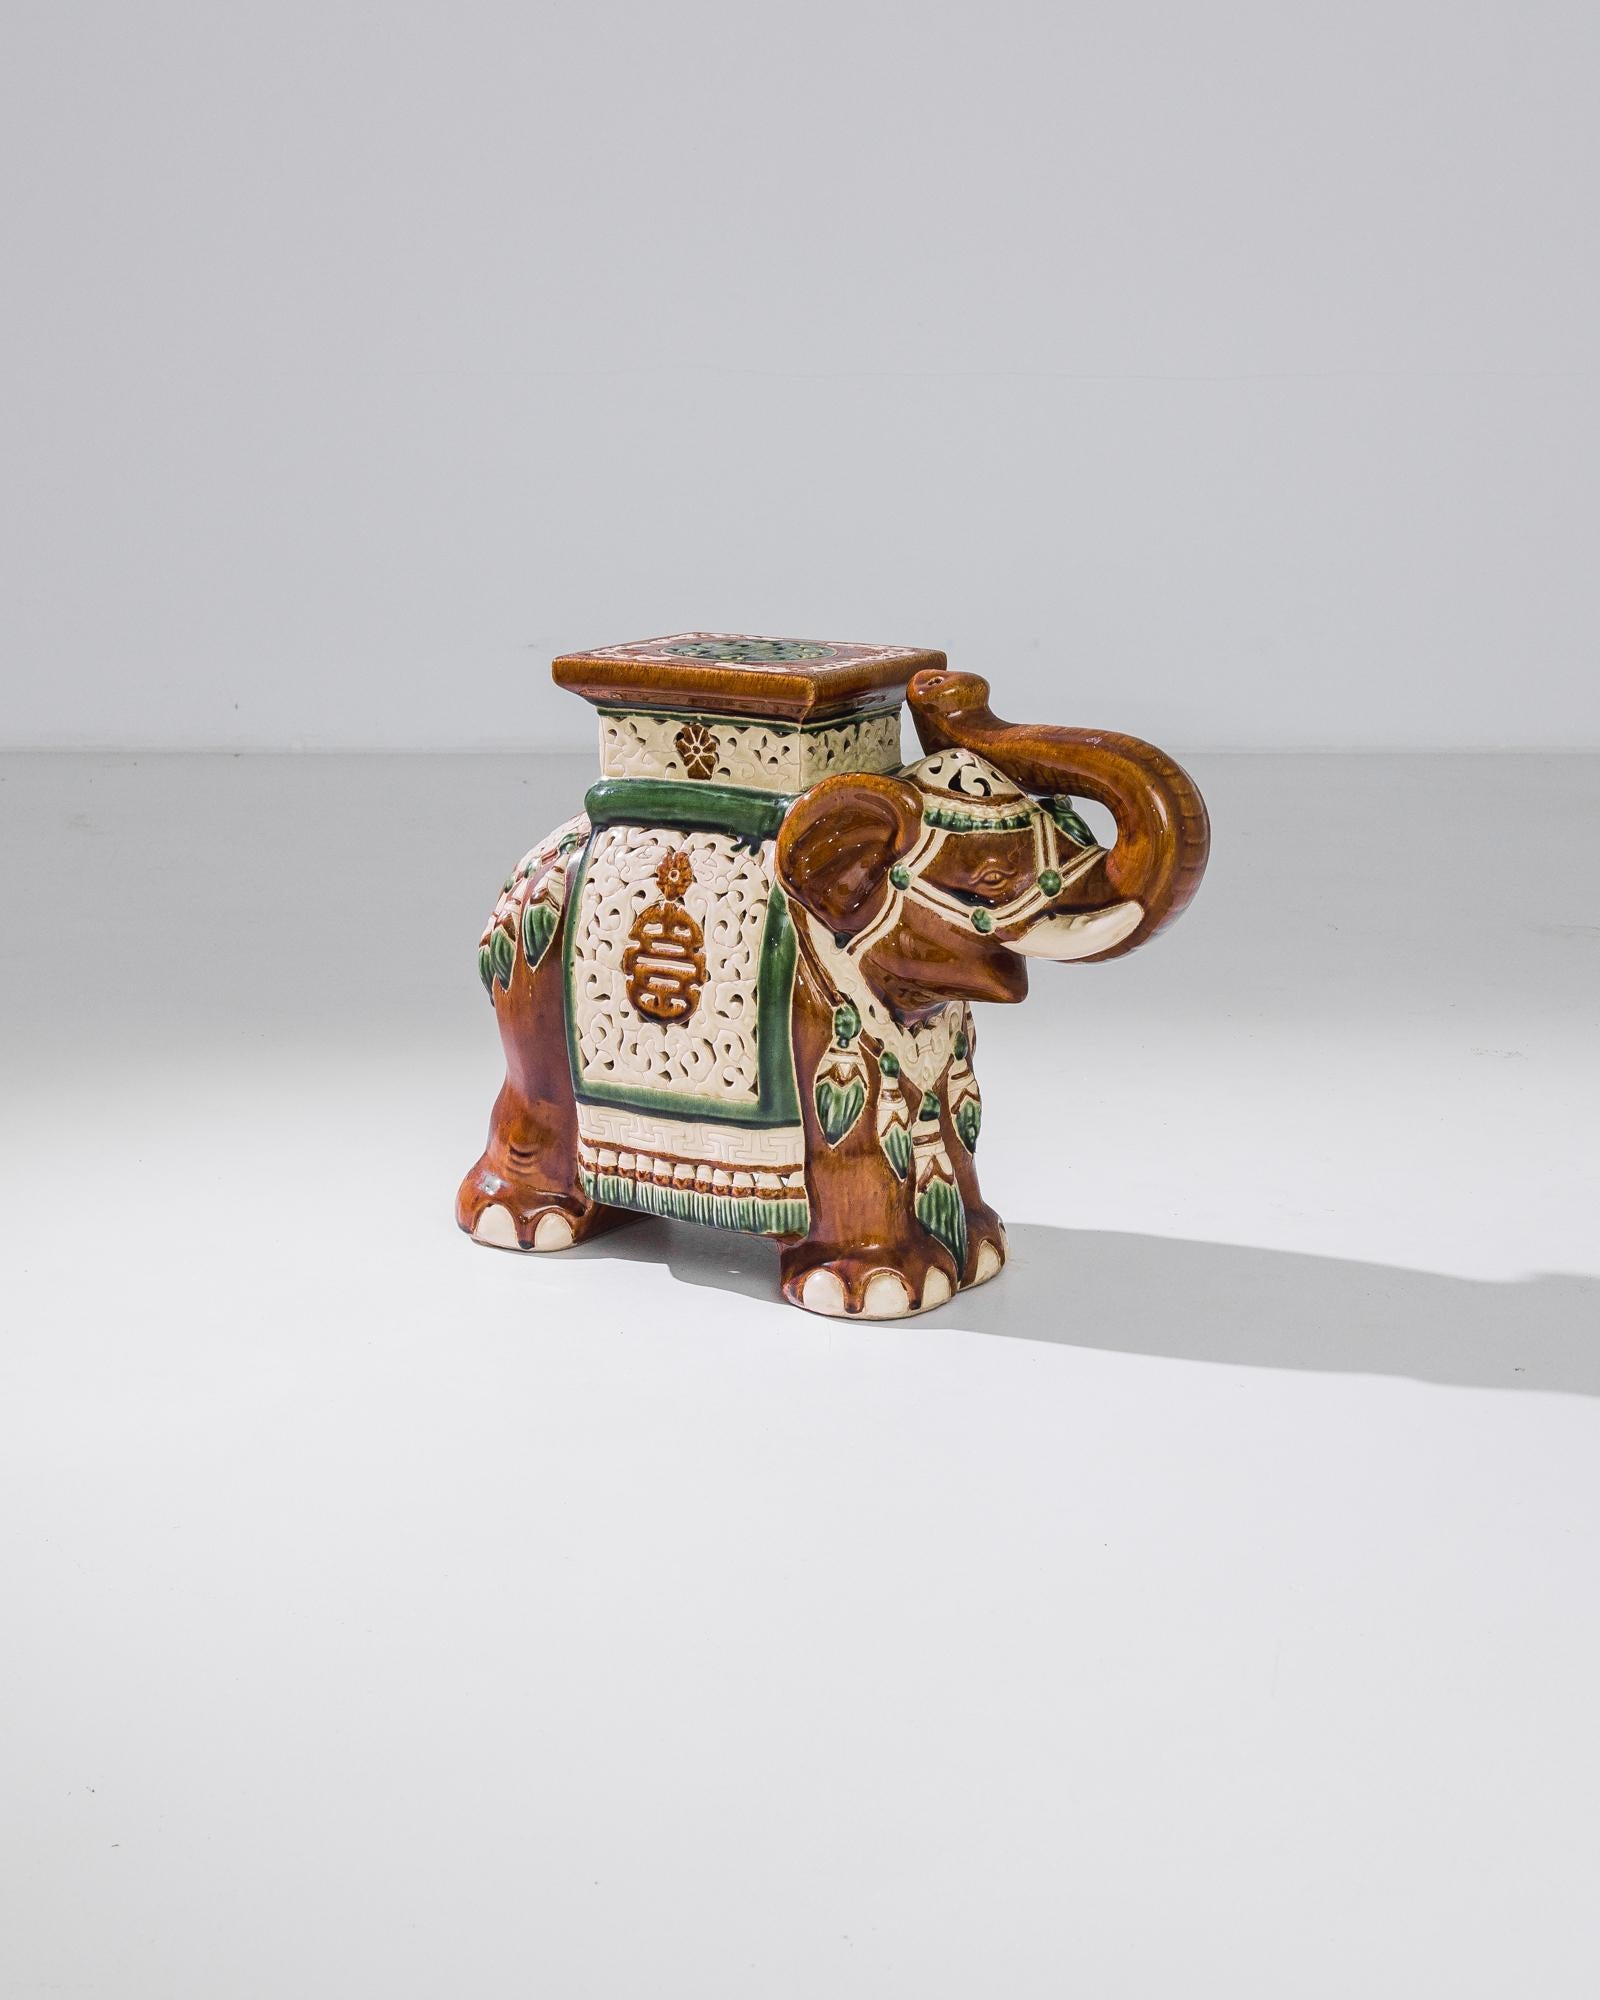 A ceramic decoration from 1960s France in the shape of an elephant. A saddle seat and blanket are glazed with bright ochre and green; the assortment of delicate patterns — reflecting Chinese and Arabic influences — suggest the romance of the Silk